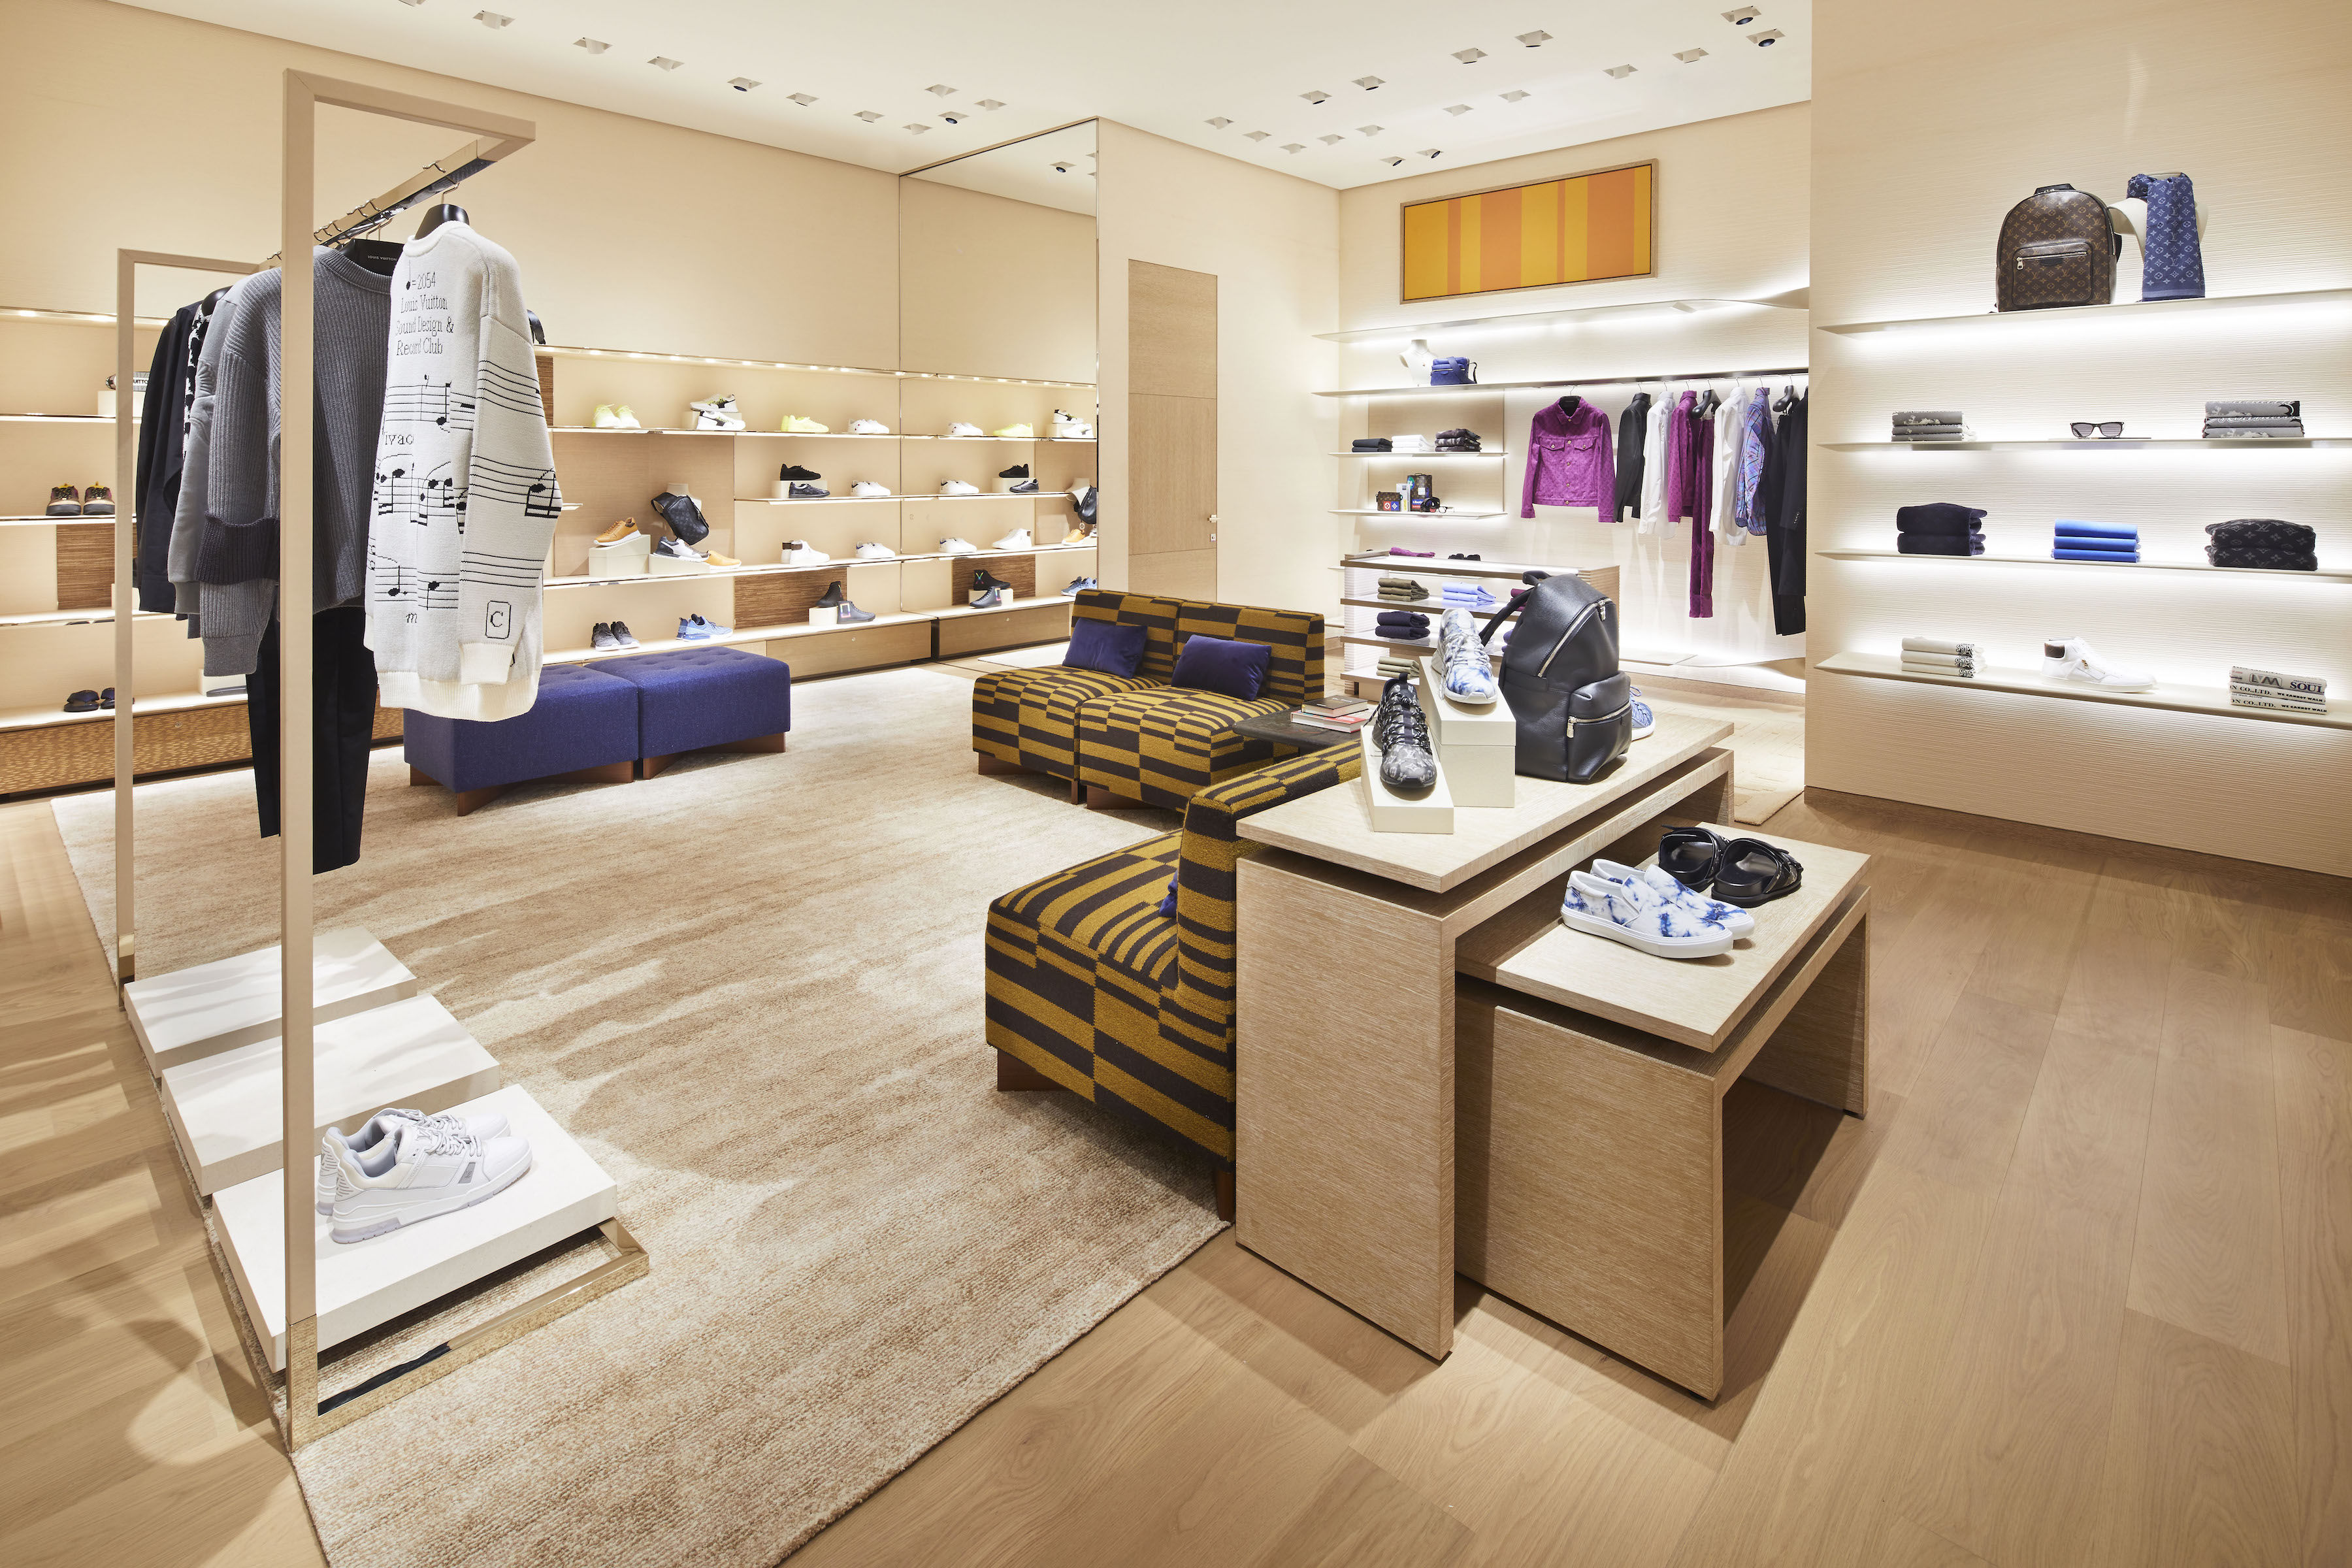 First look: Louis Vuitton reopens its boutique in The Gardens Mall